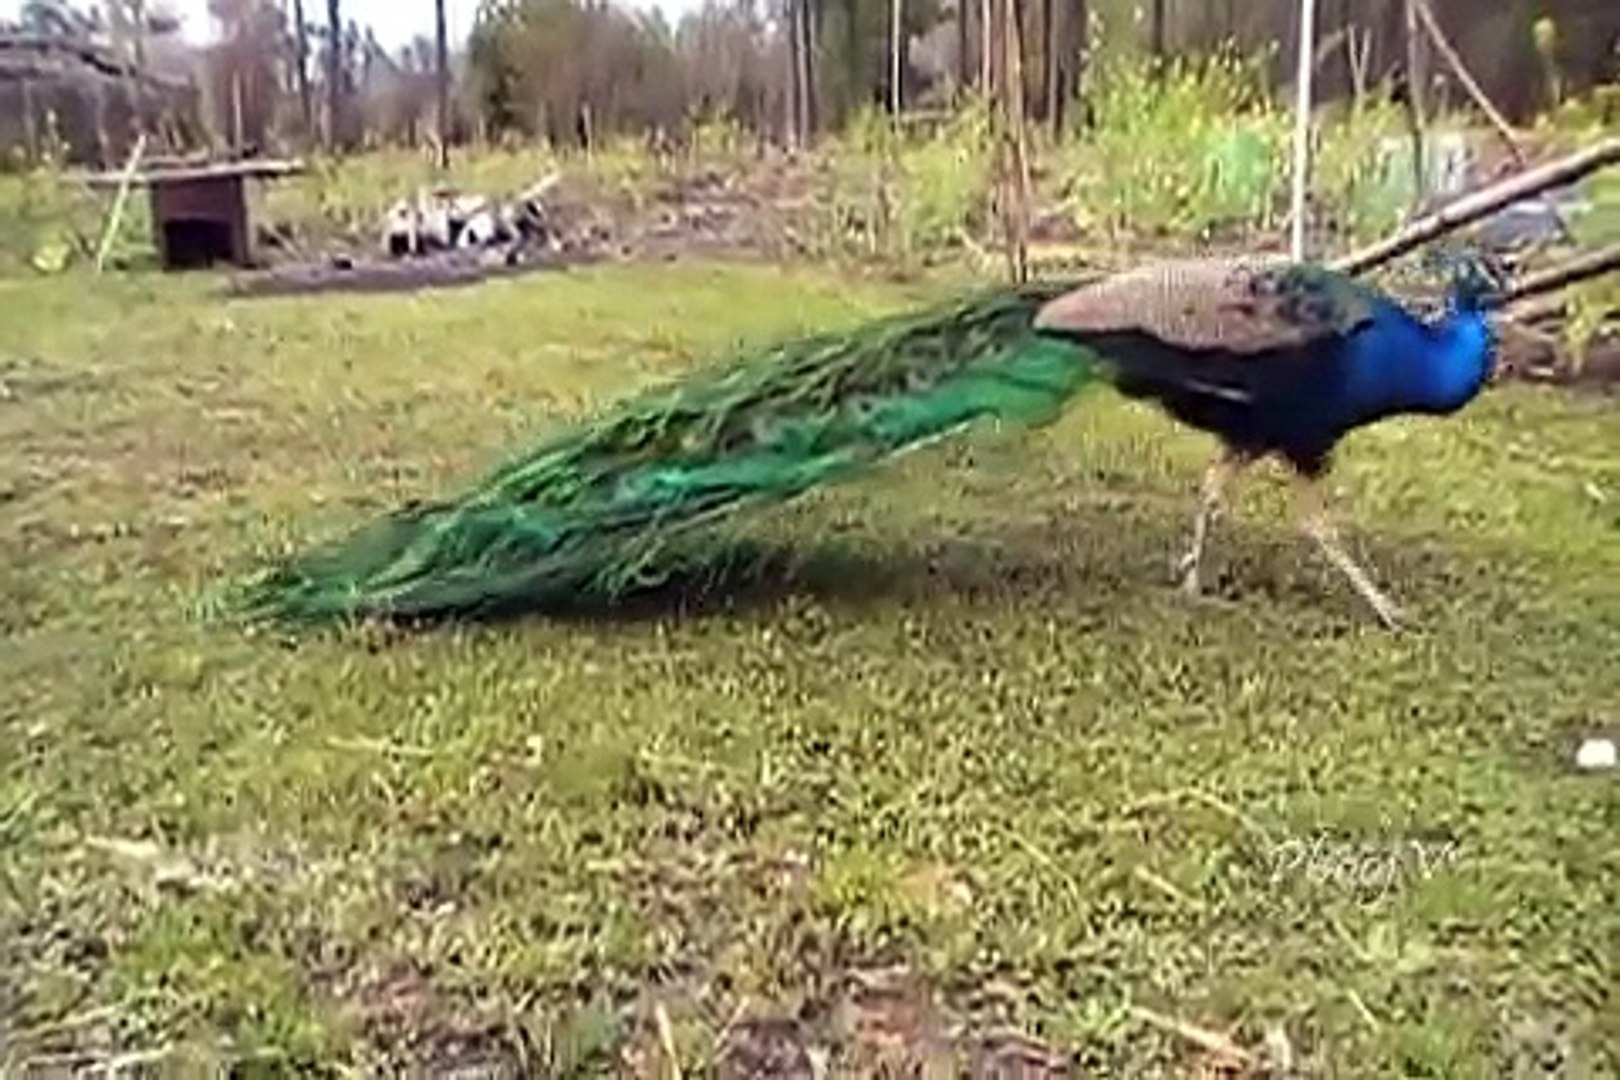 Helicopter Scared Peacock